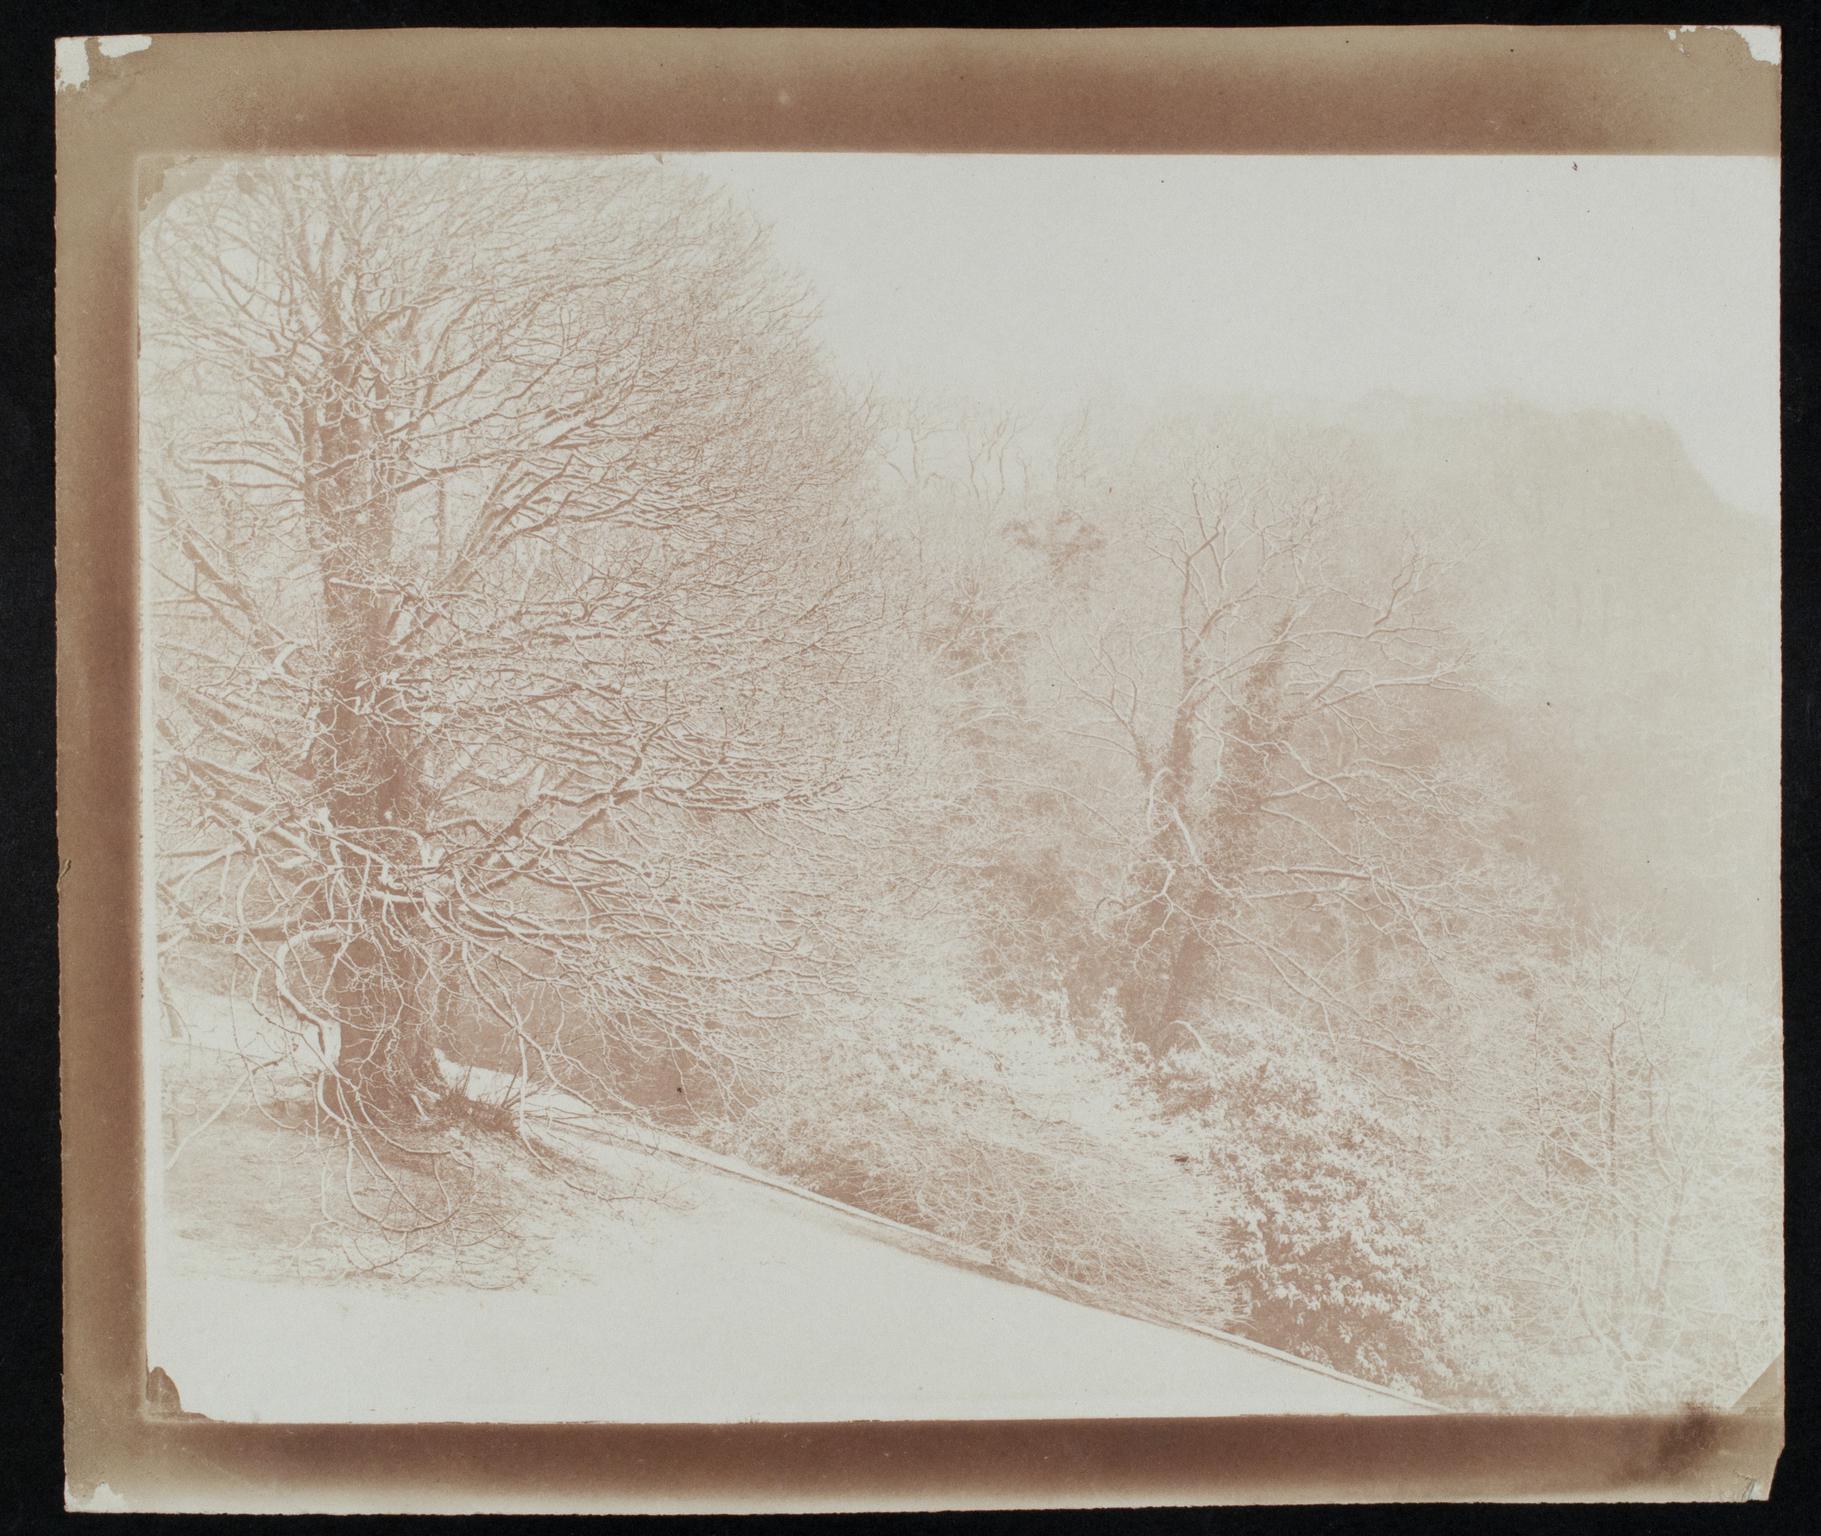 Trees in snow, photograph